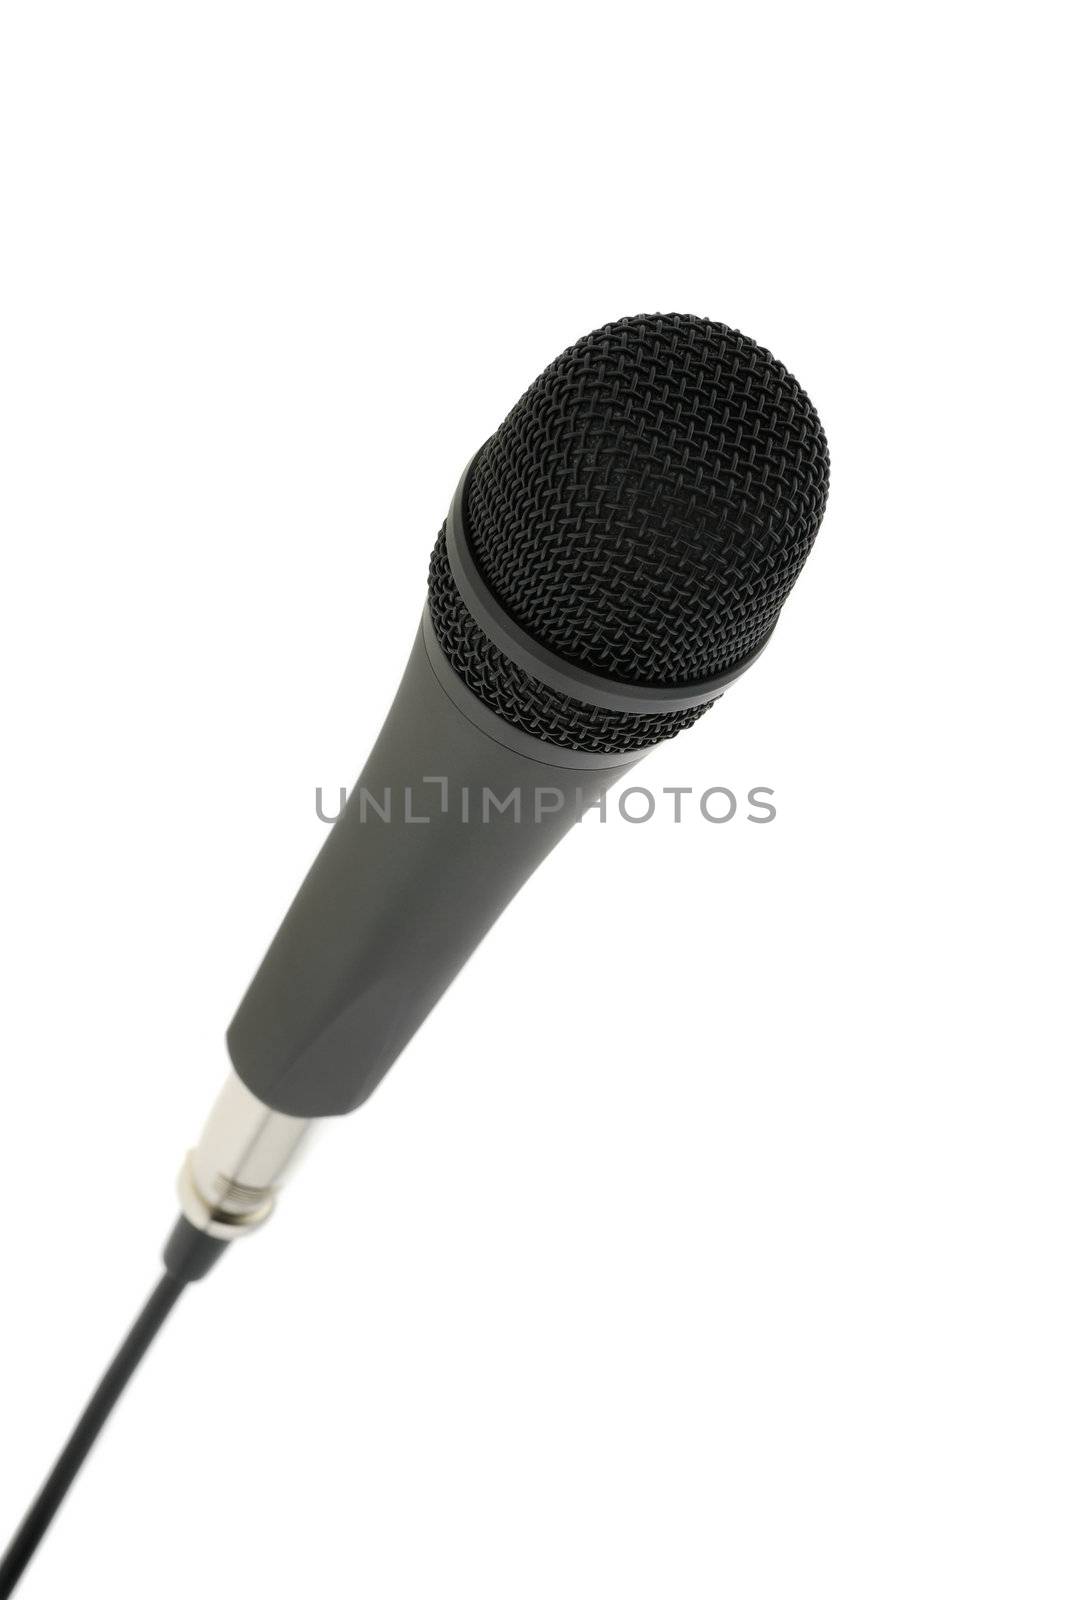 Microphone with cable by galdzer